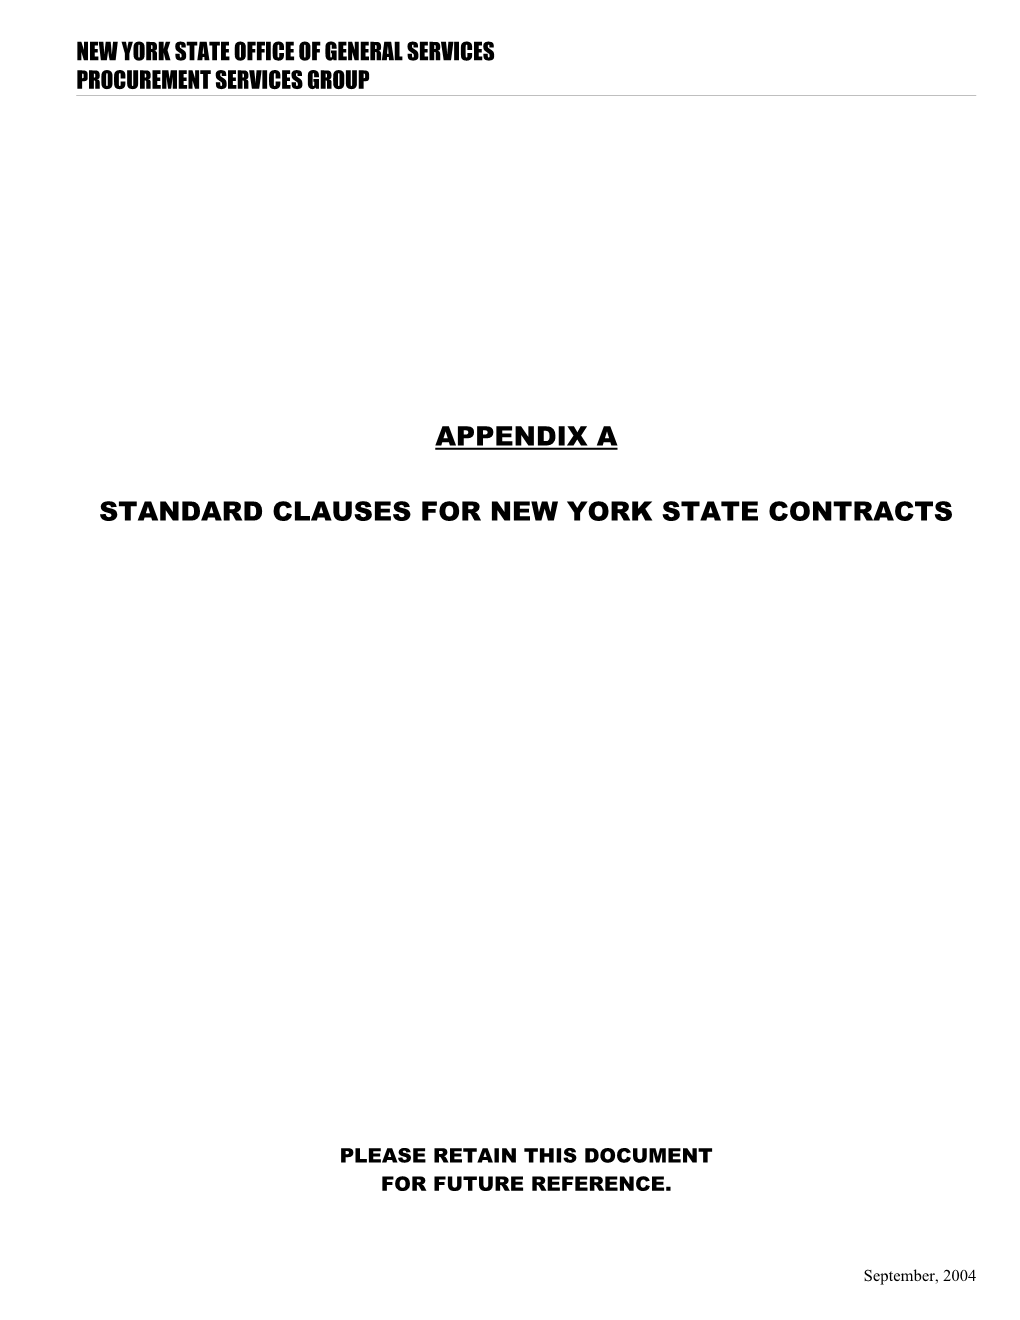 PSG Standard Clauses for NYS Contracts-Appendix A